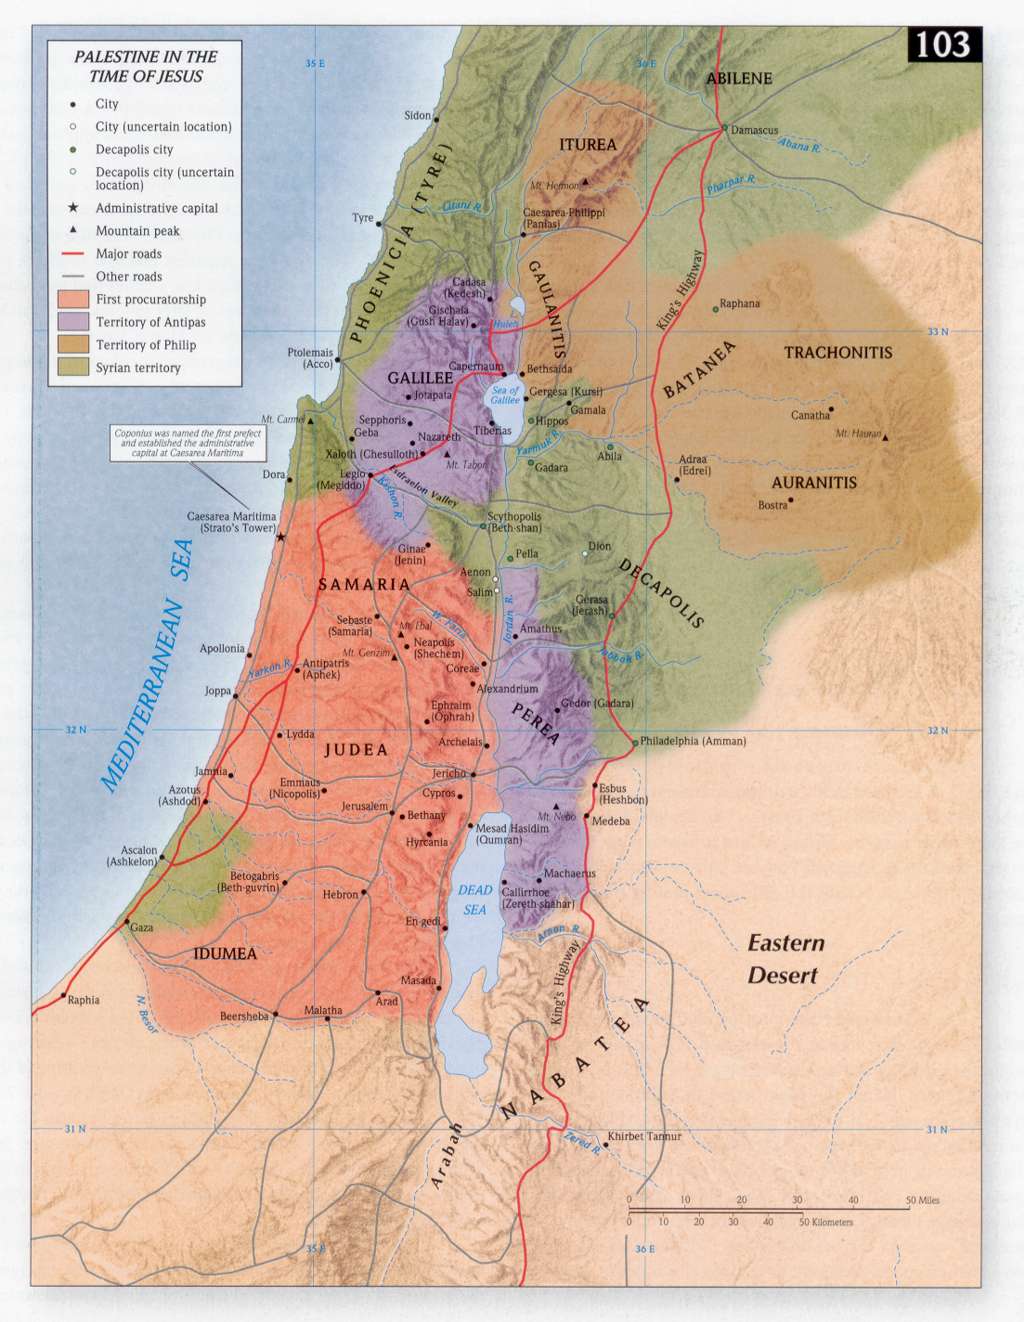 Map of Palestine in the time of Jesus